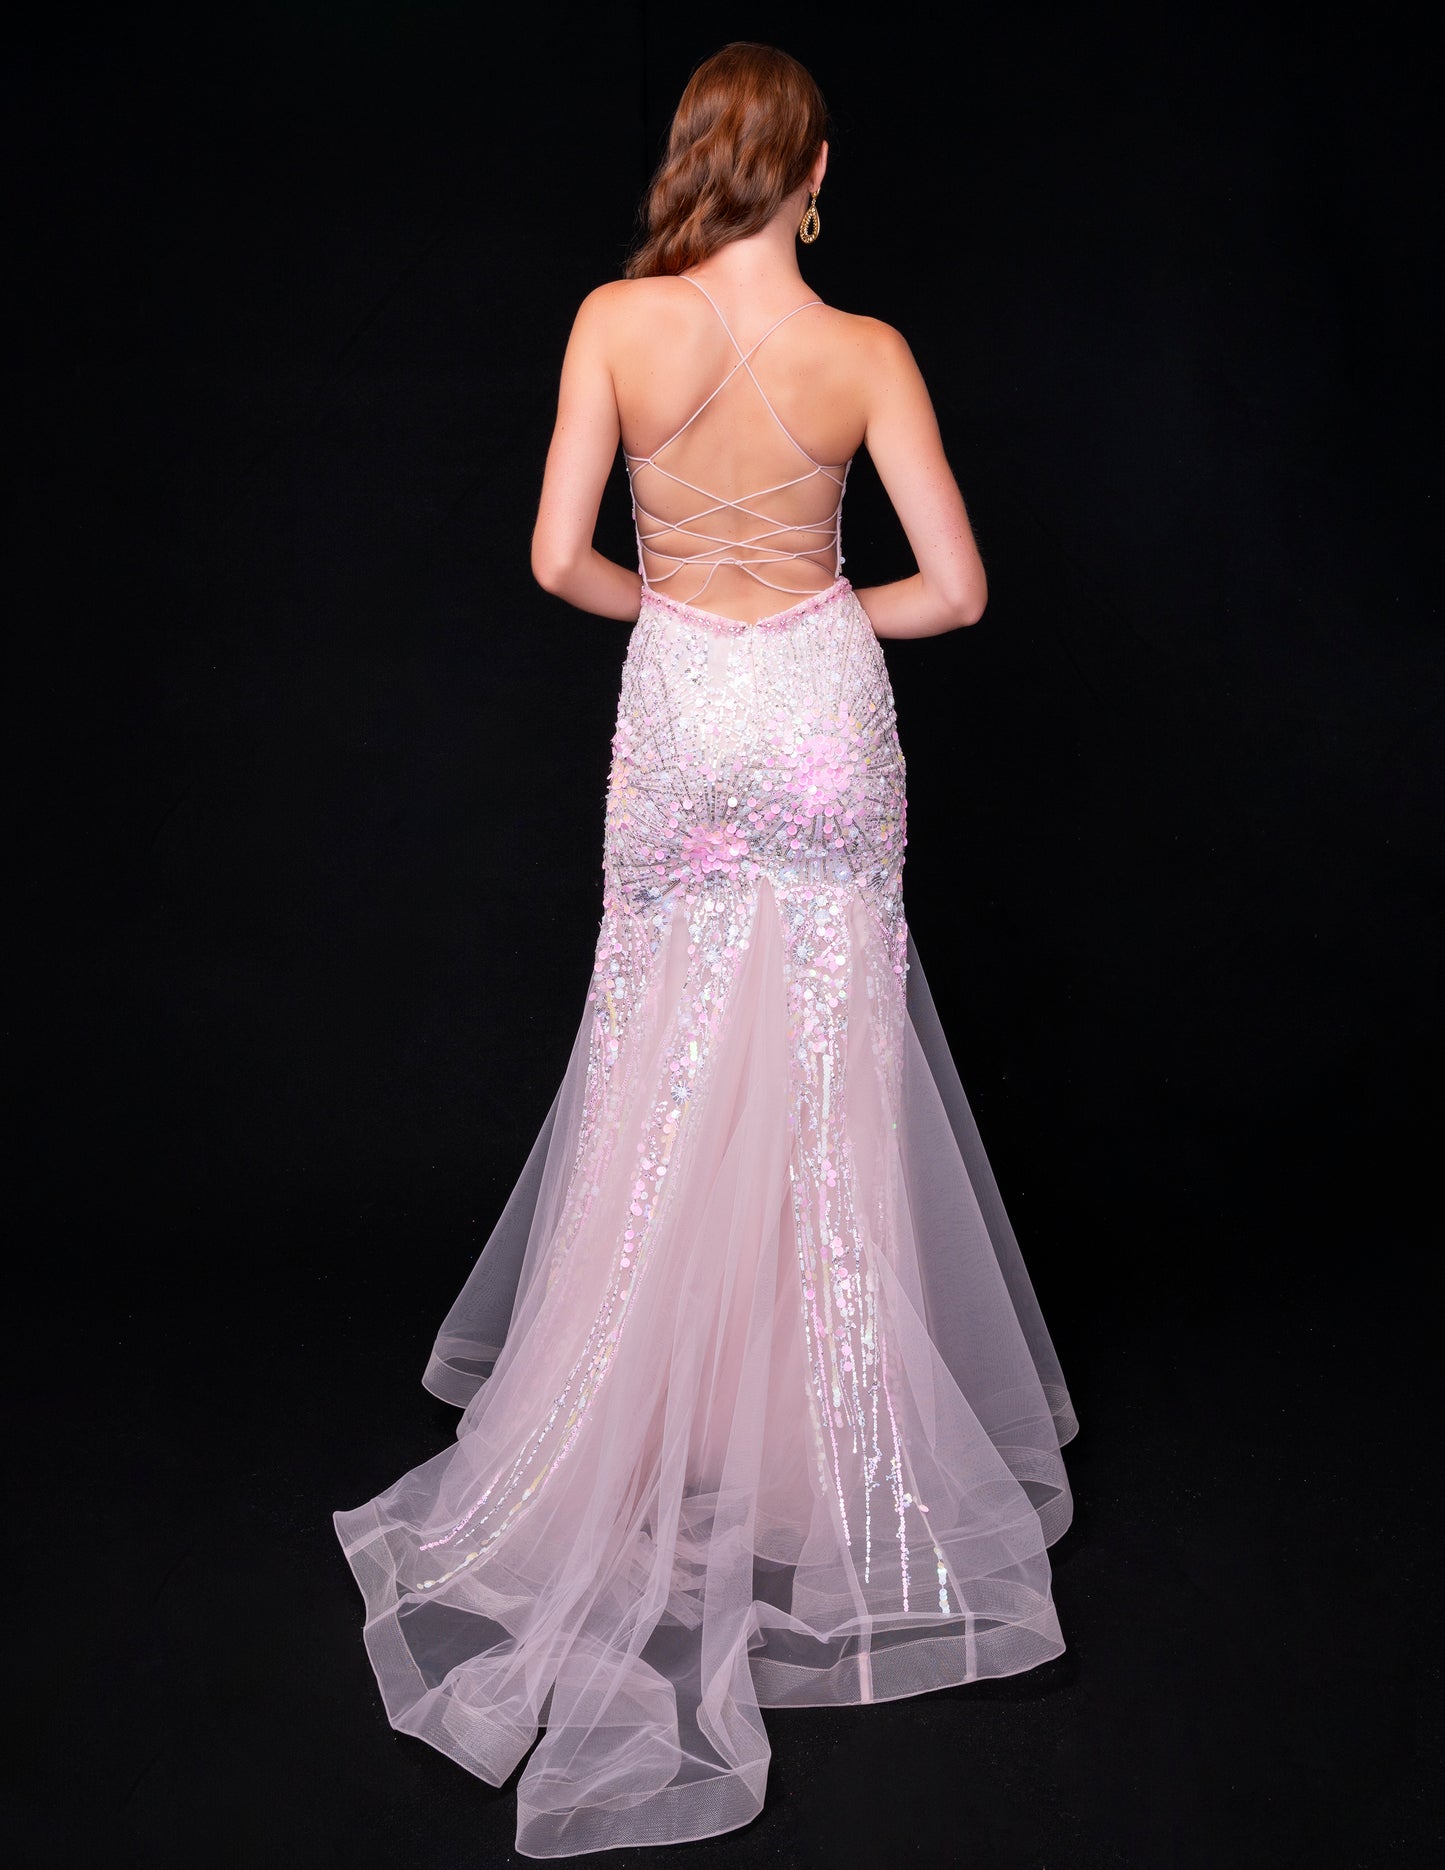 Achieve a stunning look with the Nina Canacci 8232 Sheer Corset Sequin Mermaid Prom Dress. This backless formal gown features a sheer corset, sequin details, and a mermaid silhouette for a show-stopping appearance. Perfect for prom or any formal event, this dress will make you feel confident and elegant.